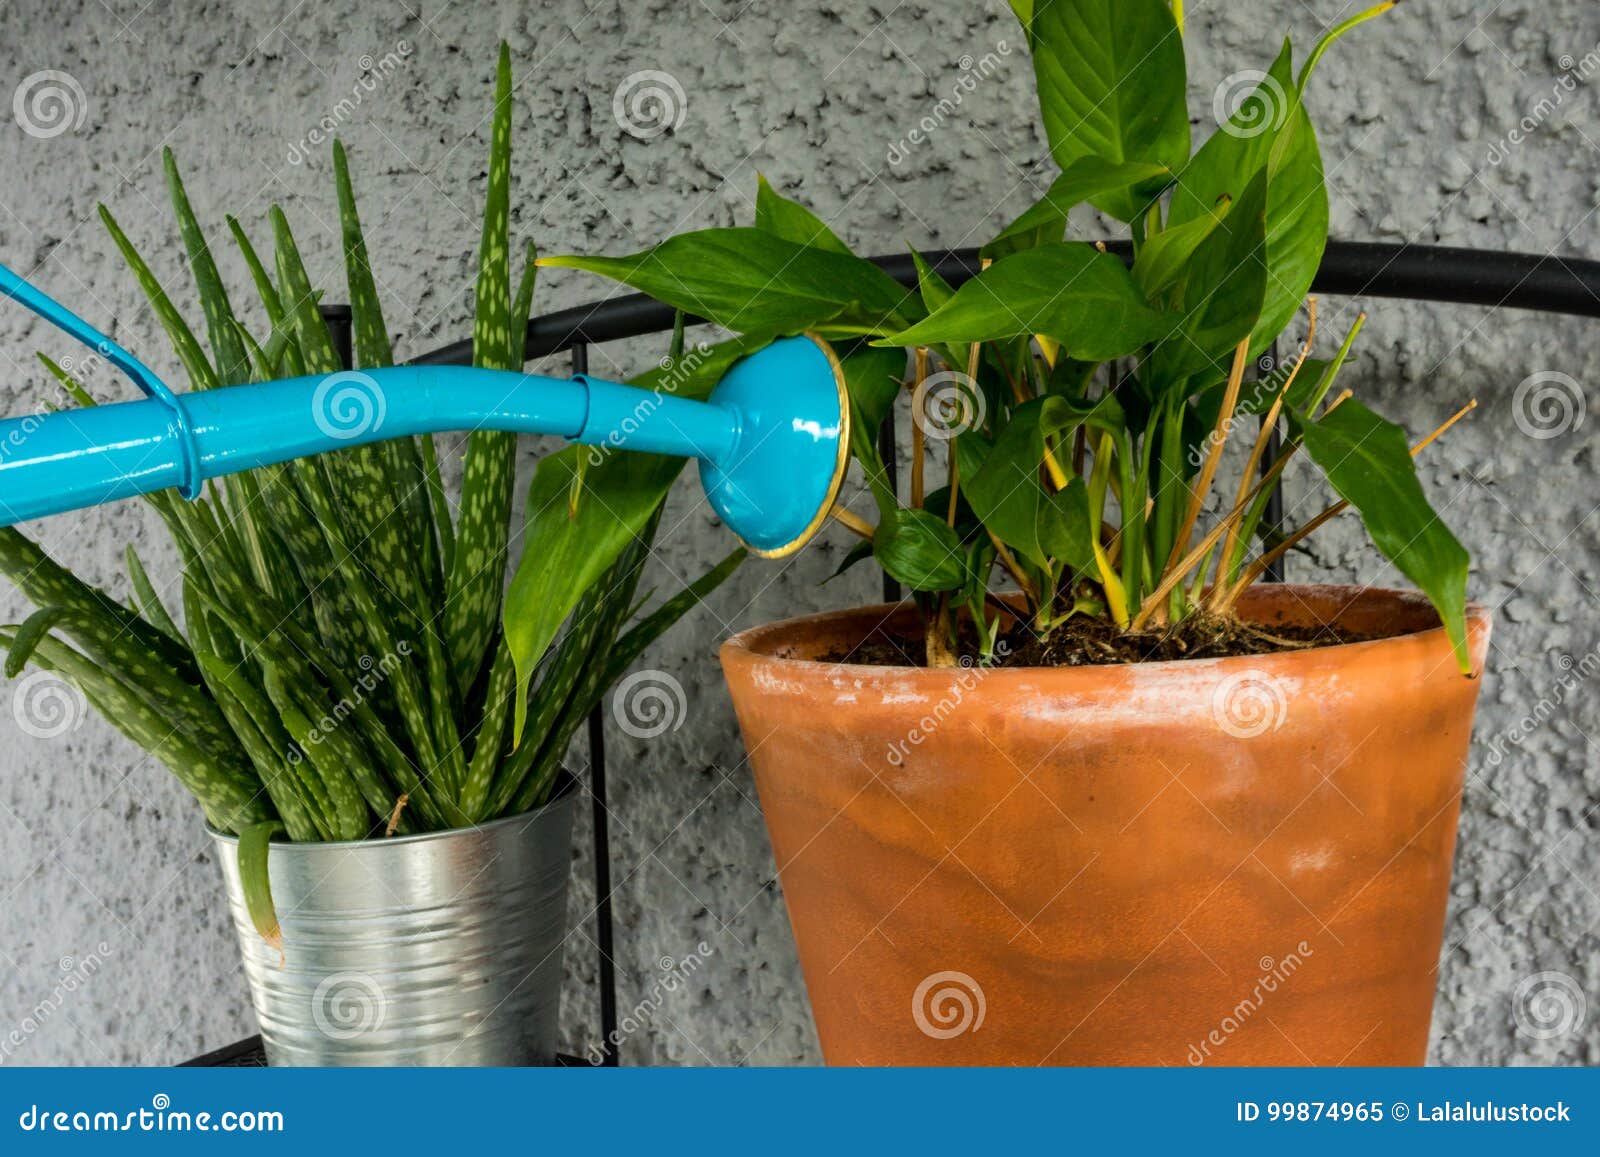 Blue Watering Can Giving Water To Orchid Plant With Aloe Vera